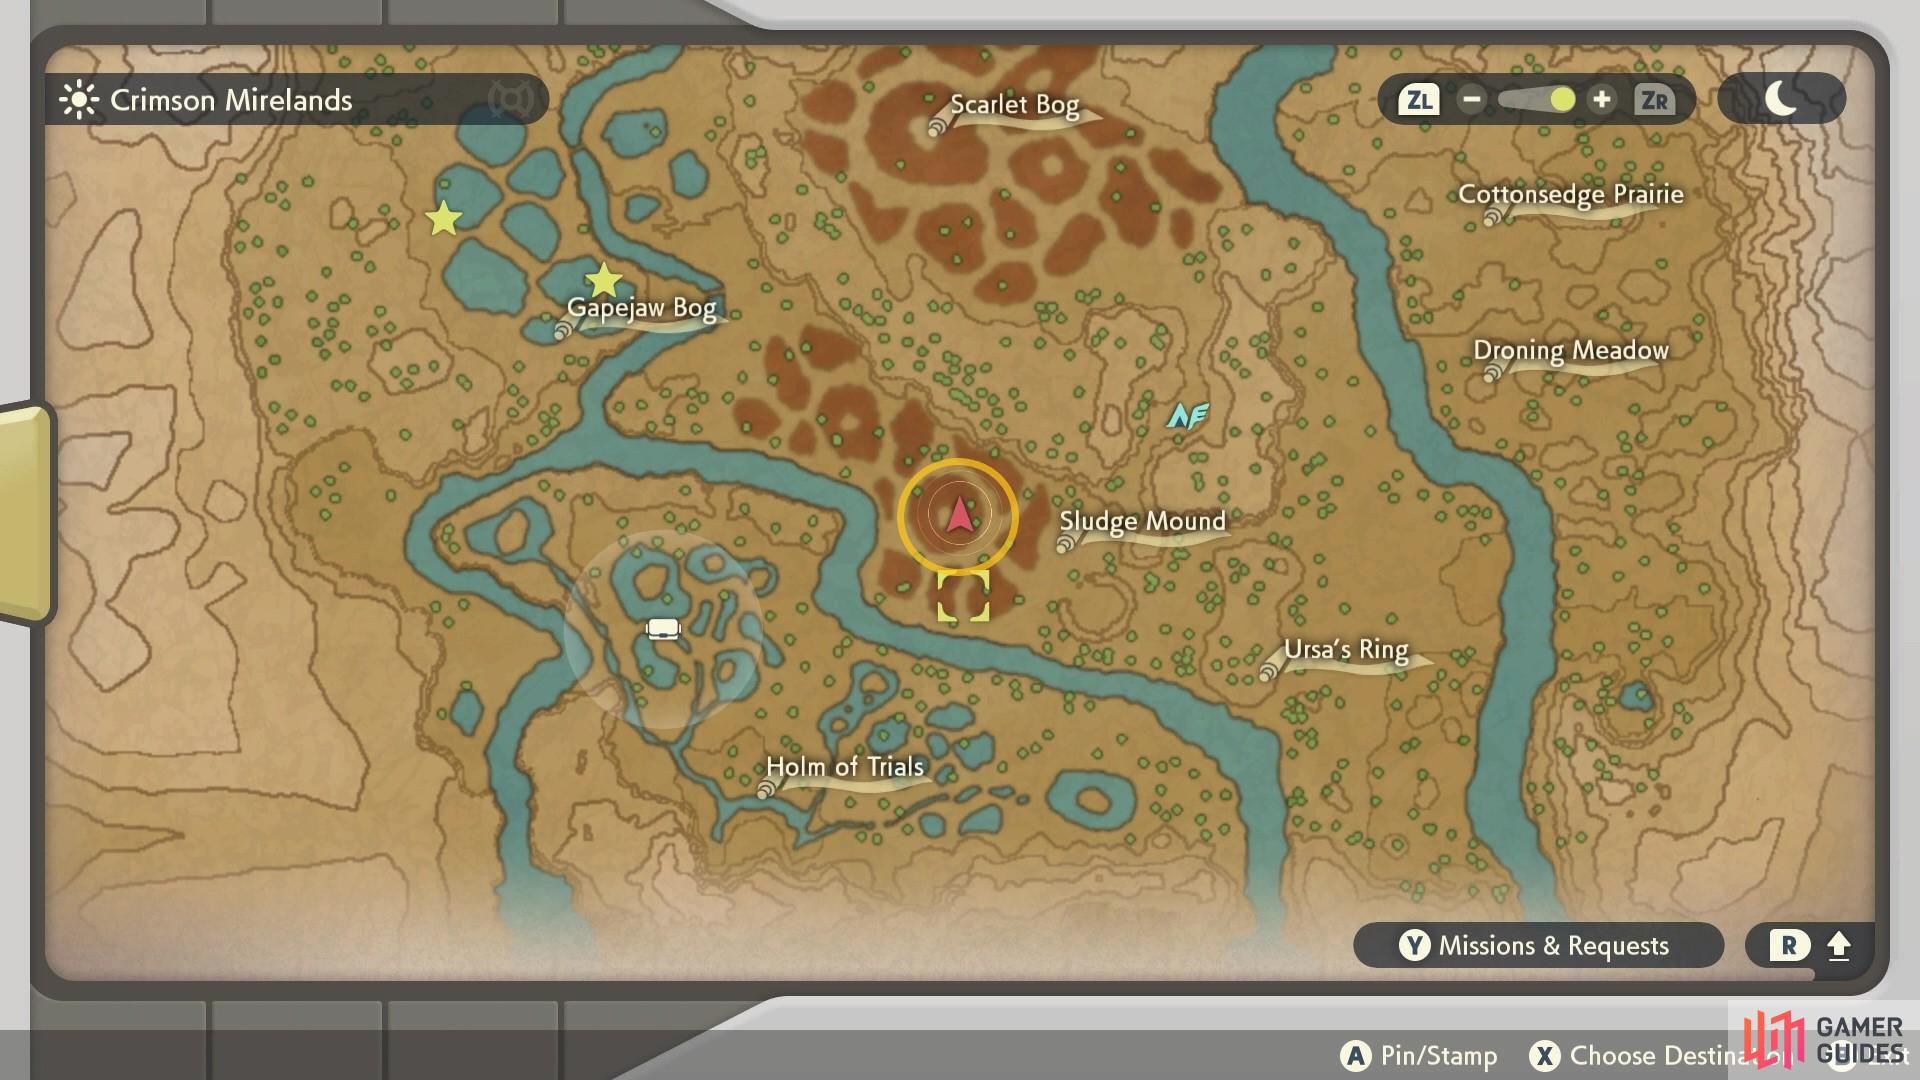 The charm is found in the bog southwest of Bogbound Camp.